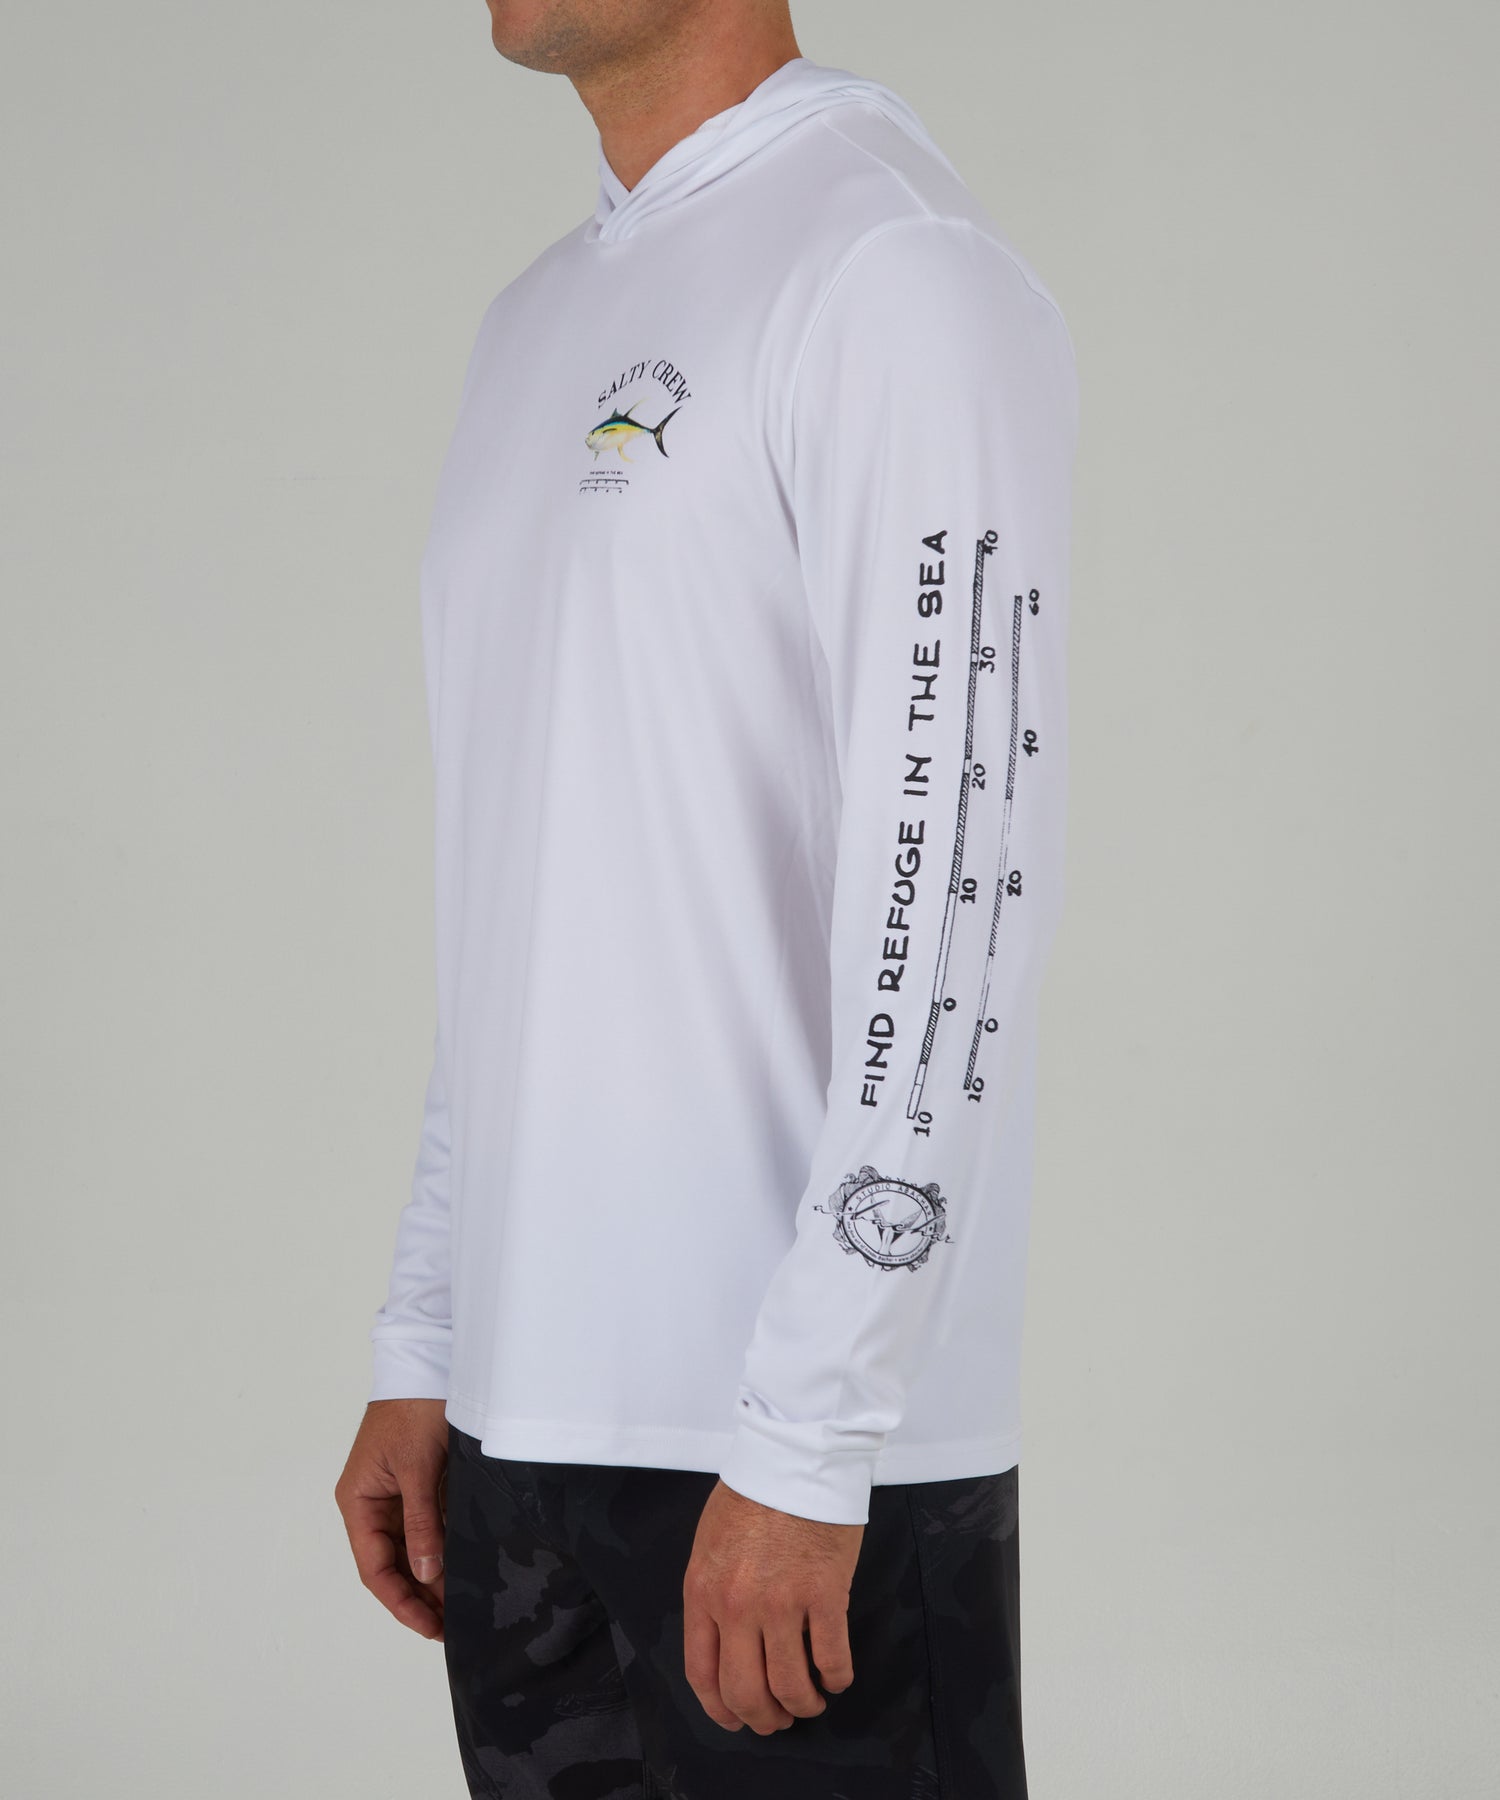 front angled view of Ahi Mount White Hood Sunshirt